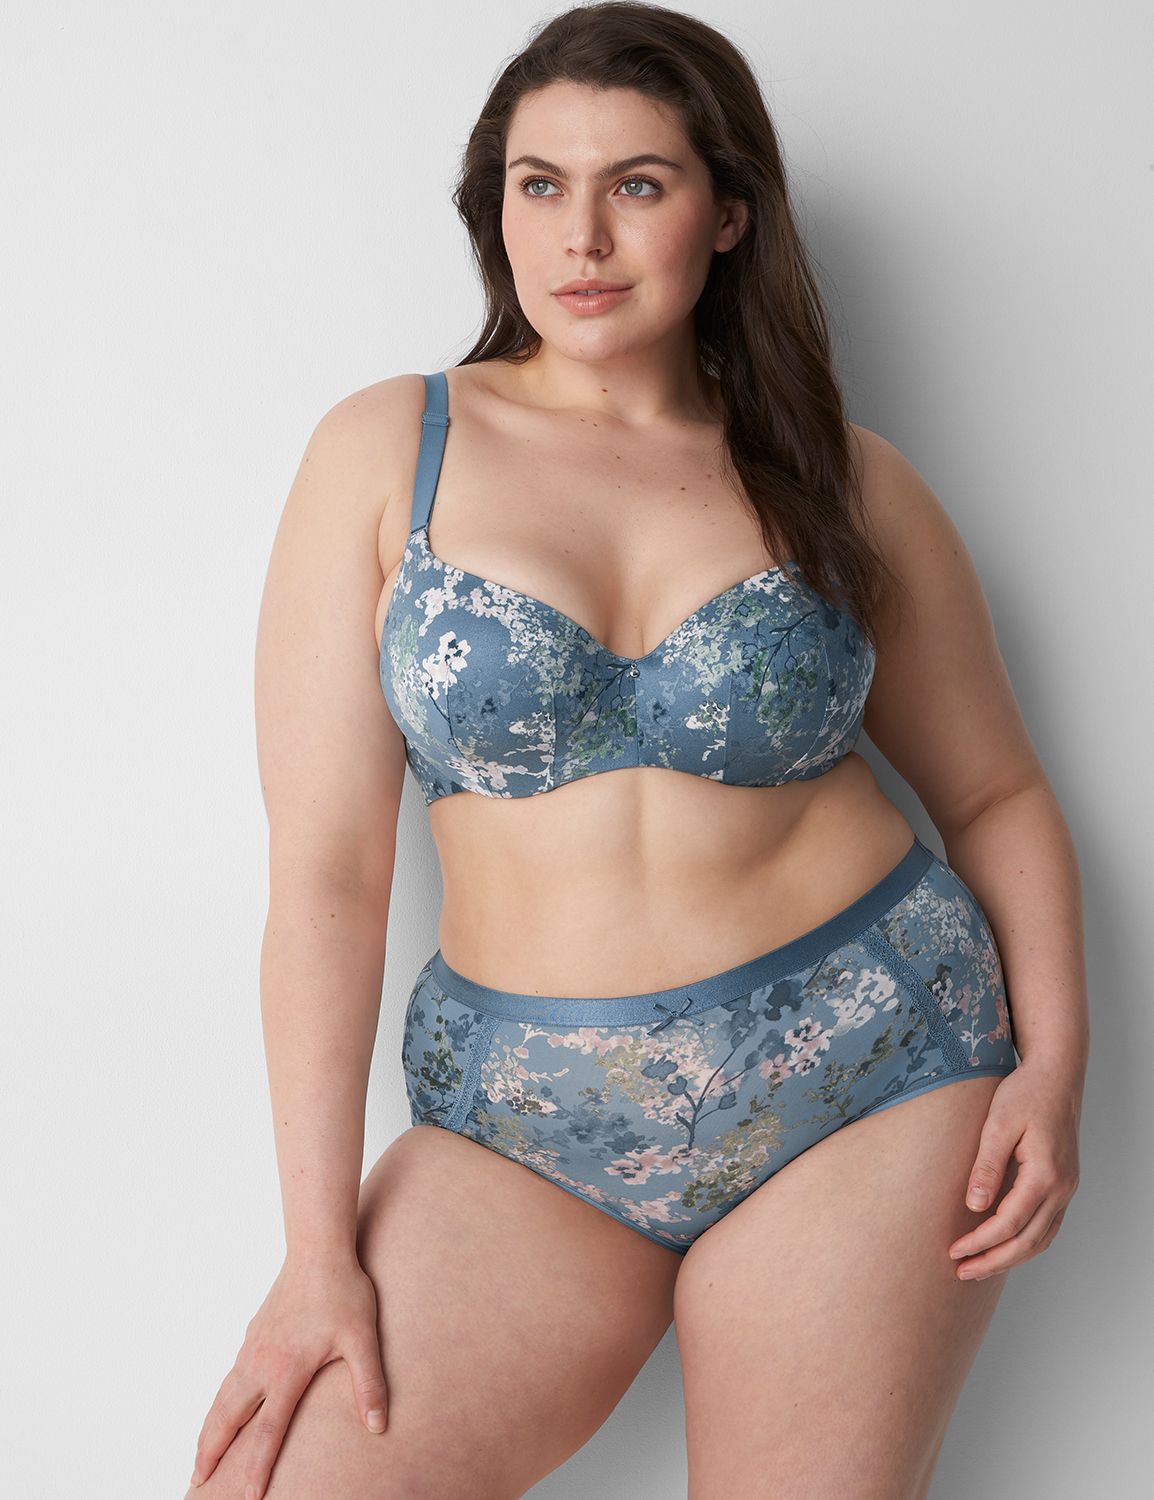 ALL bras on sale. ALL panties on sale. - Lane Bryant Email Archive